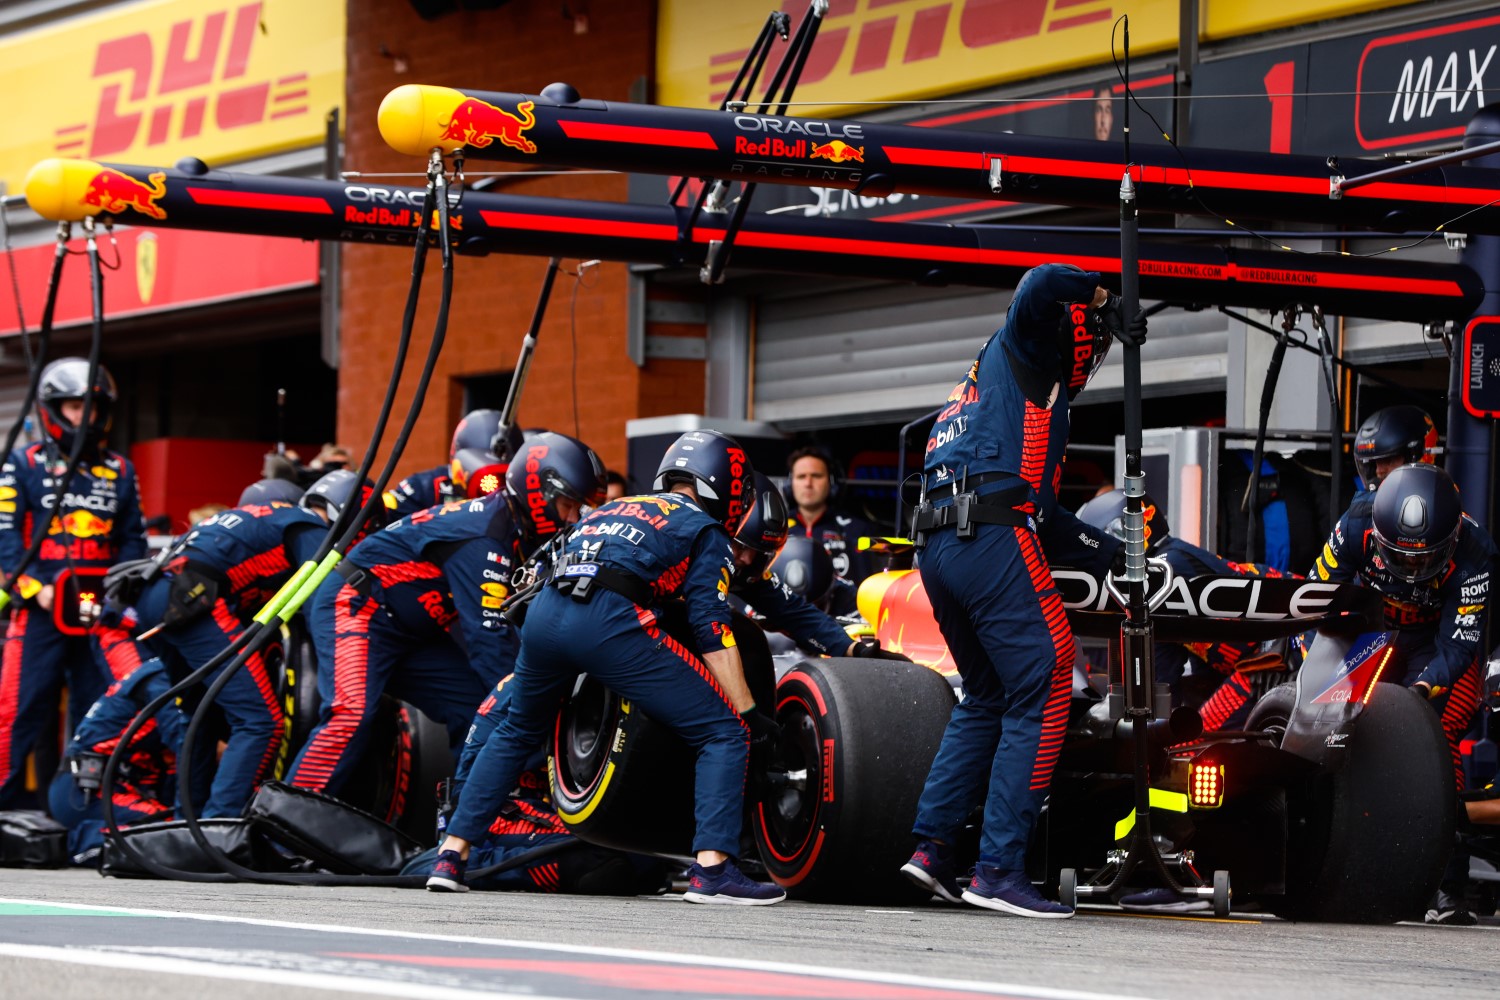 Sergio Perez, Red Bull Racing RB19, in the pits during the Belgian GP at Circuit de Spa Francorchamps on Sunday July 30, 2023 in Spa, Belgium. (Photo by Steven Tee / LAT Images)